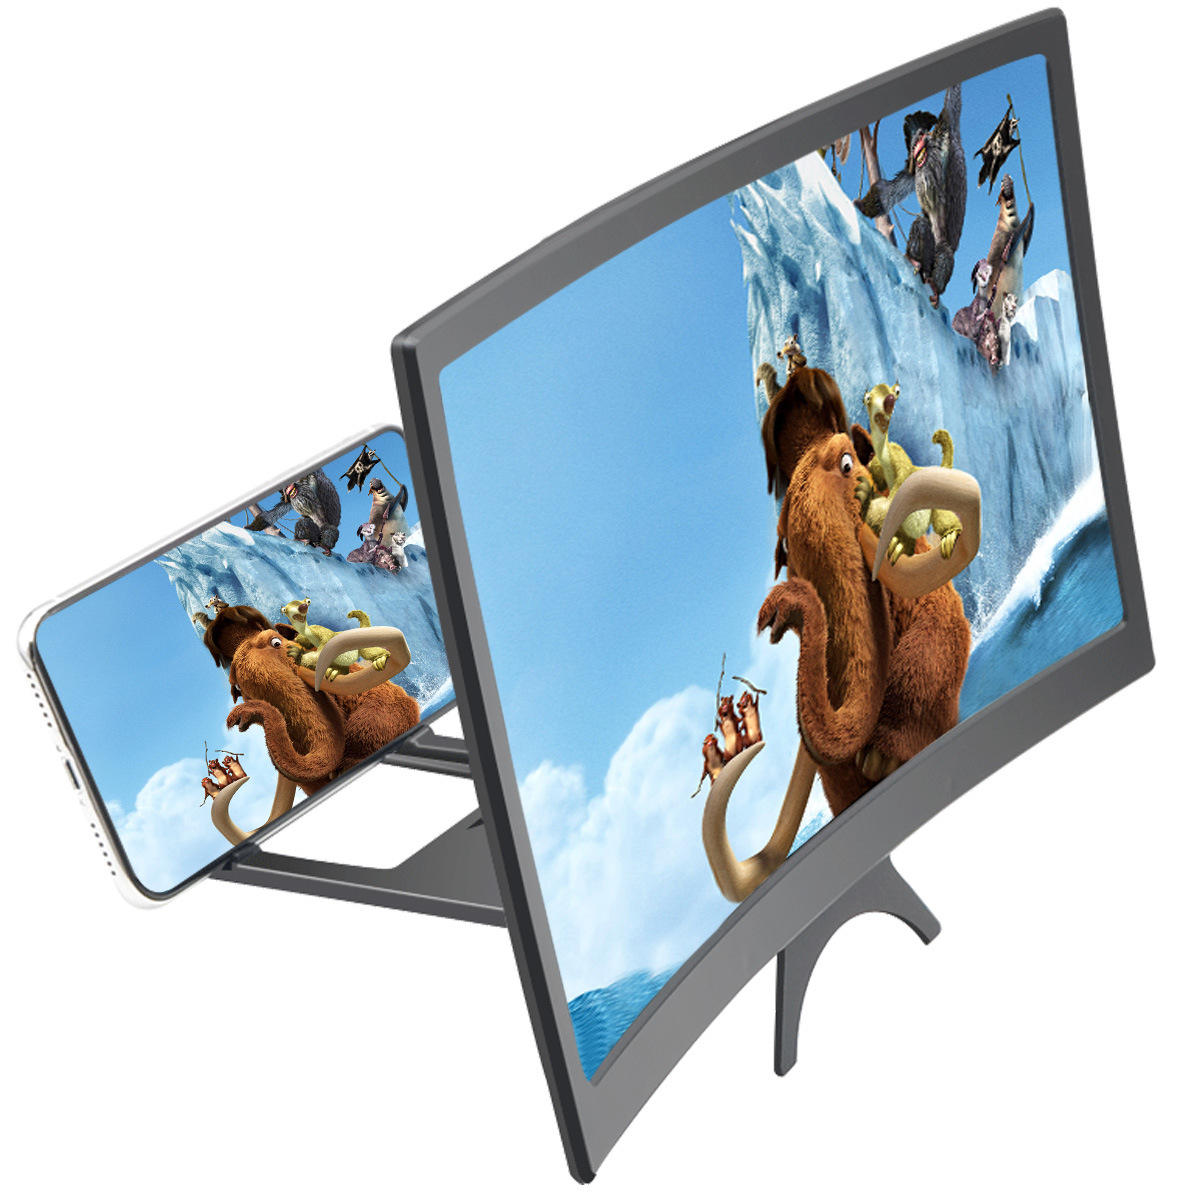 

12 Inch Curved 3D HD Phone Screen Magnifier Movie Video Amplifier for Smart Phones Below 6.5 Inch for iPhone Huawei